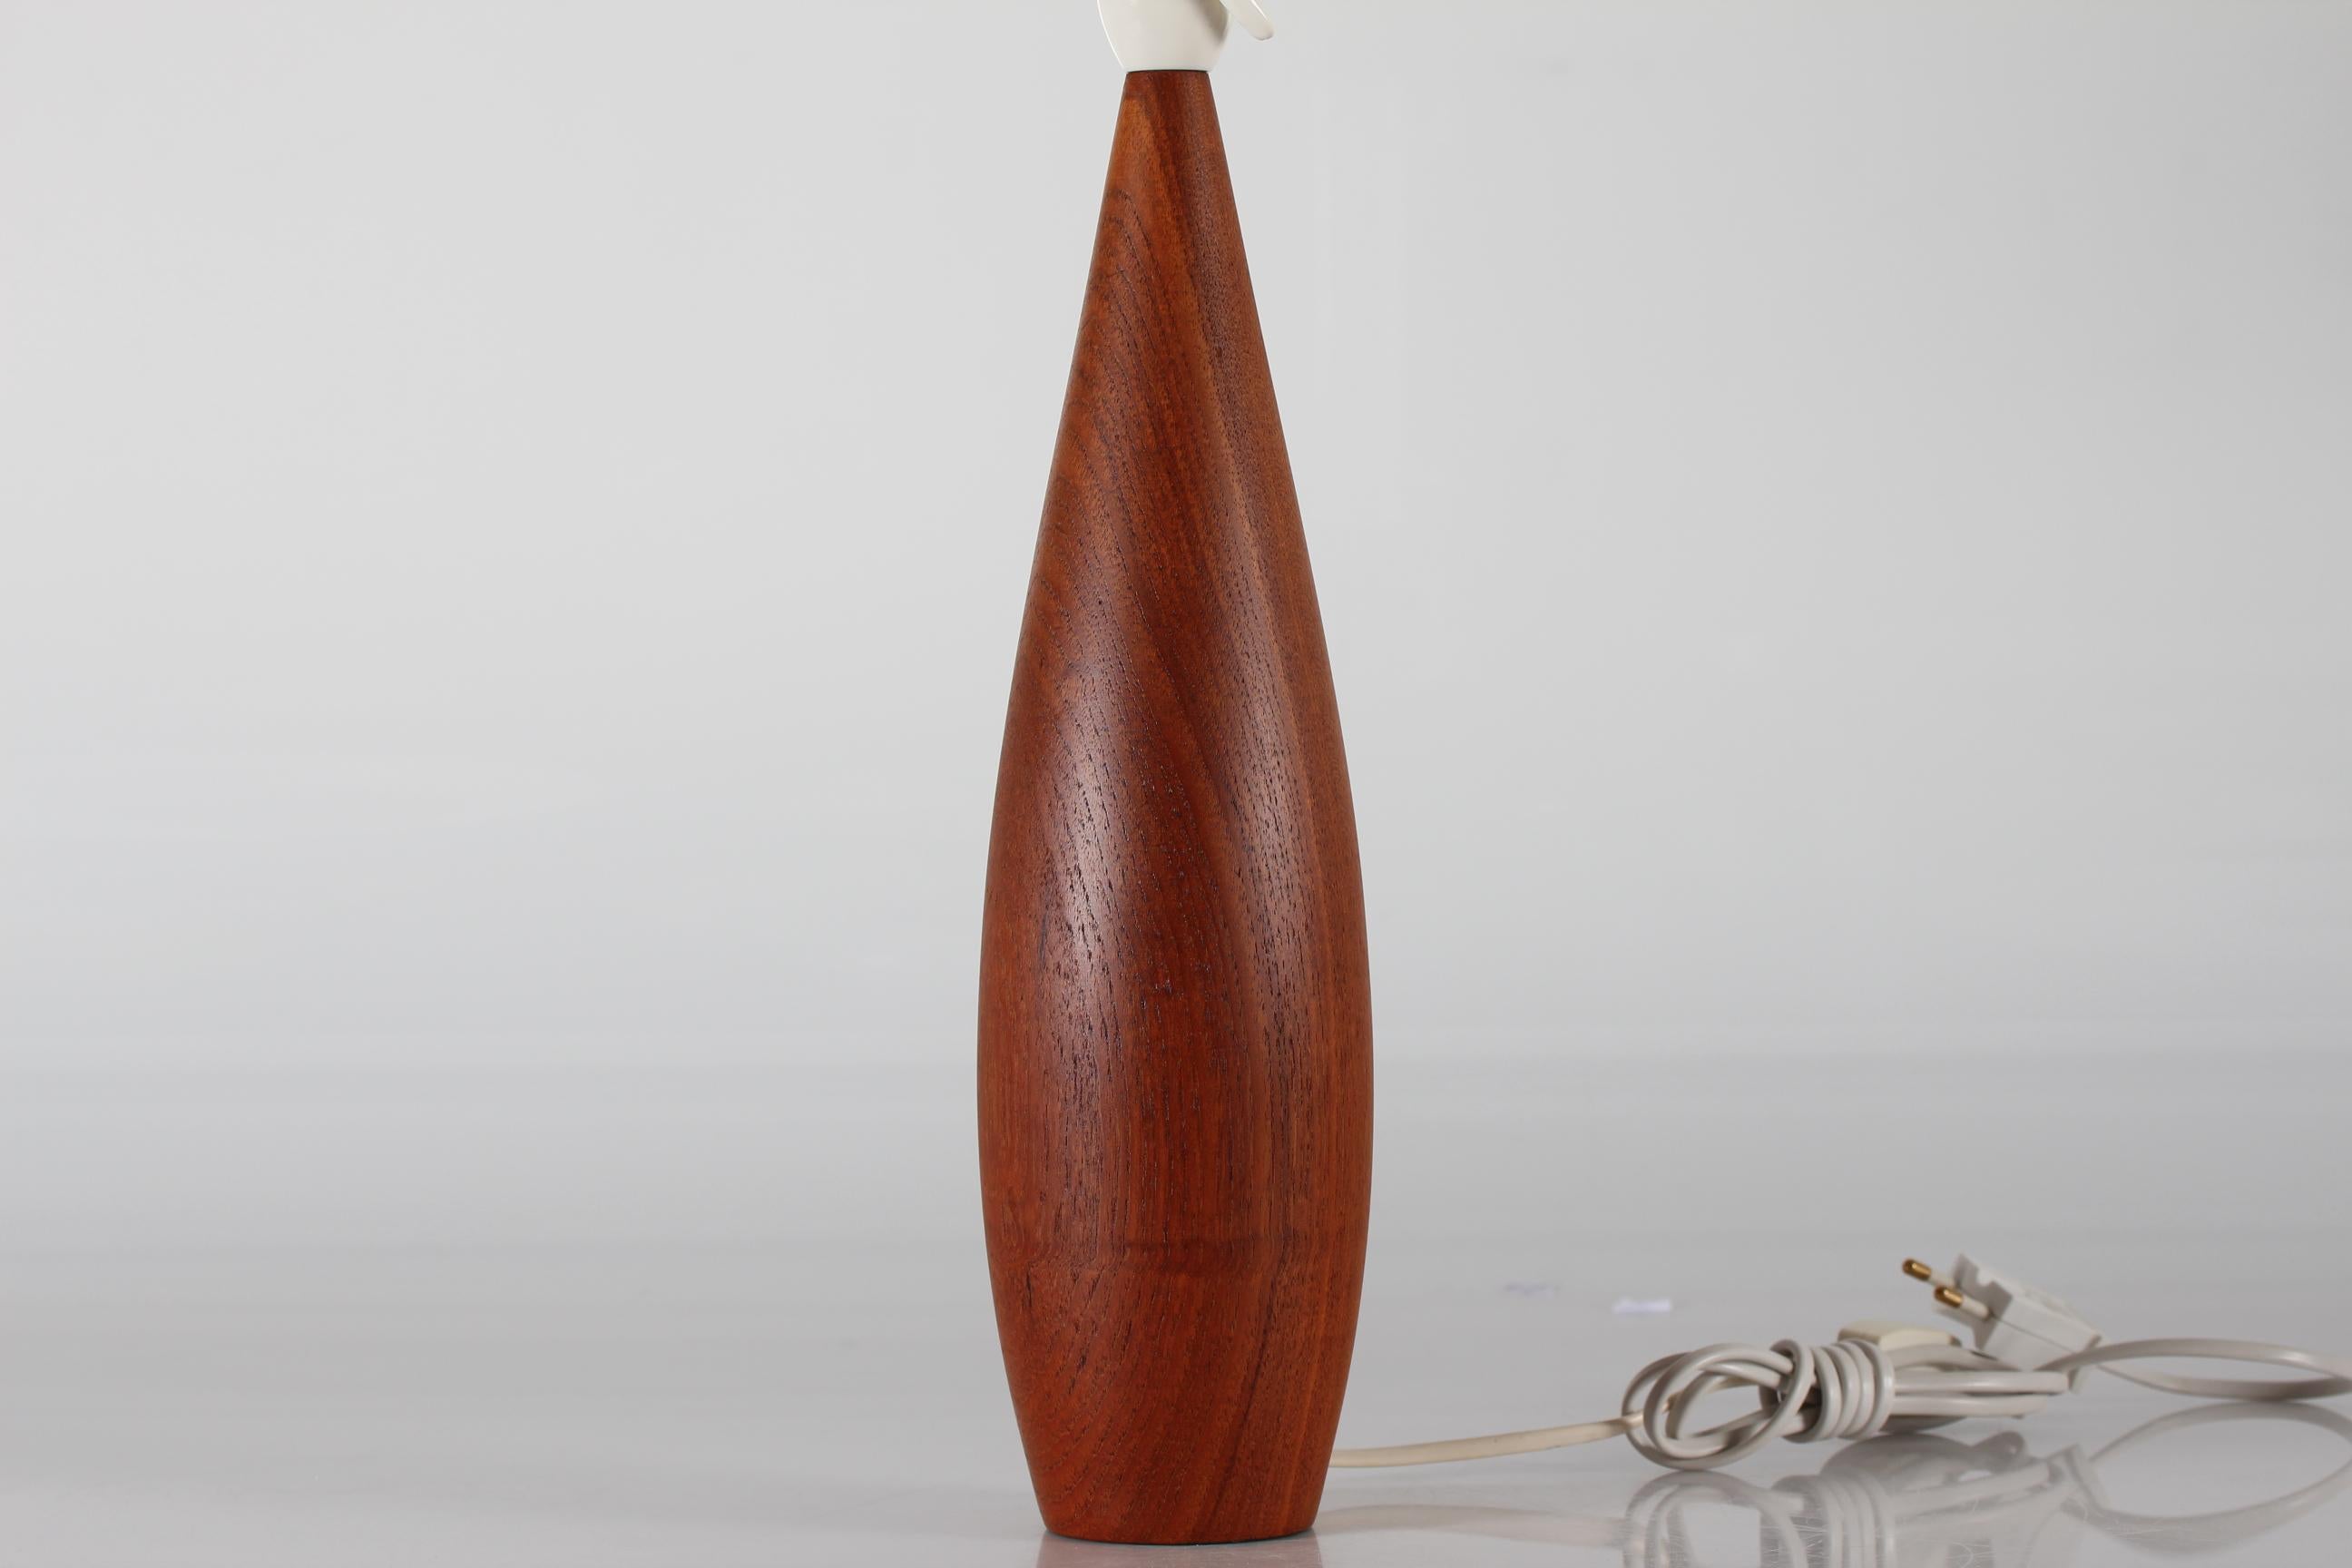 Scandinavian table lamp from the 1960s.
The tall and slender lamp foot is made of hand-turned solid teak and mounted with a new lampshade.

Measures: Height 60 cm
Height lamp foot only 36 cm
Diameter shade 32 cm.

Included is a new lamp shade